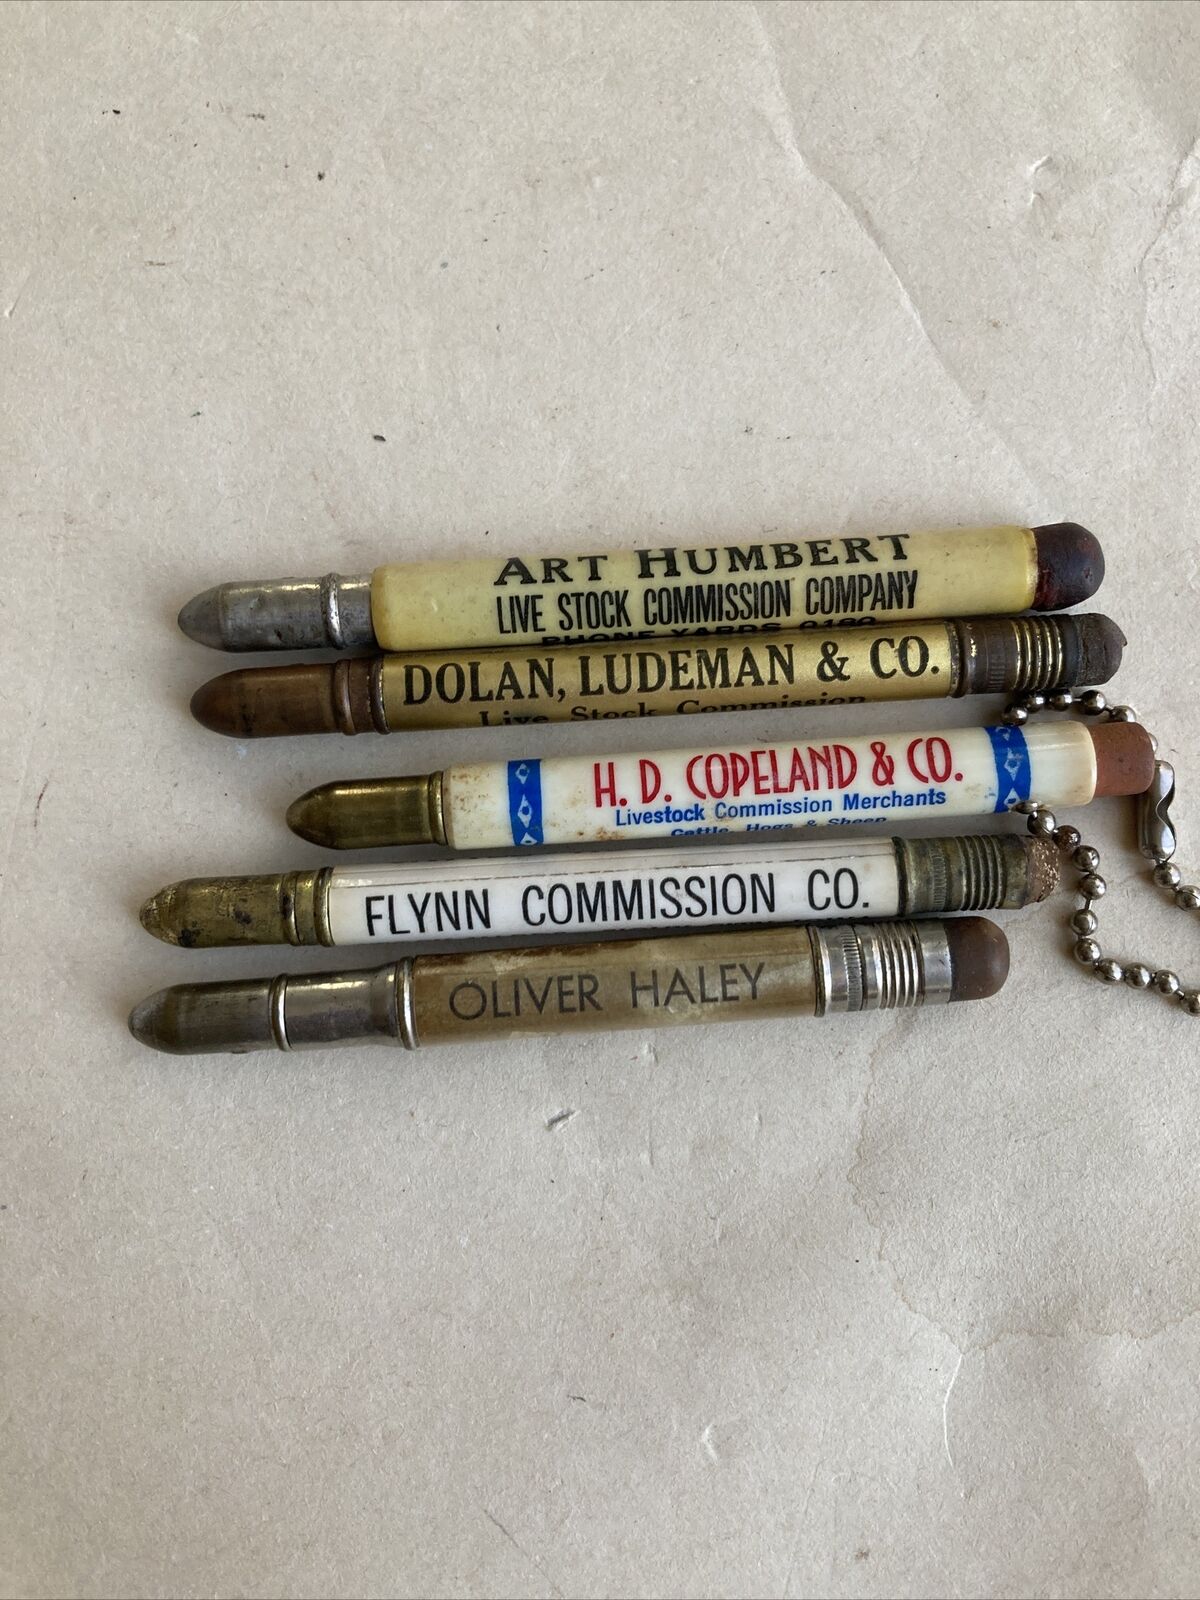 Vtg Lot 5 Bullet Pencils Advertising Stock Yard Chicago Peoria IL Sioux City IA